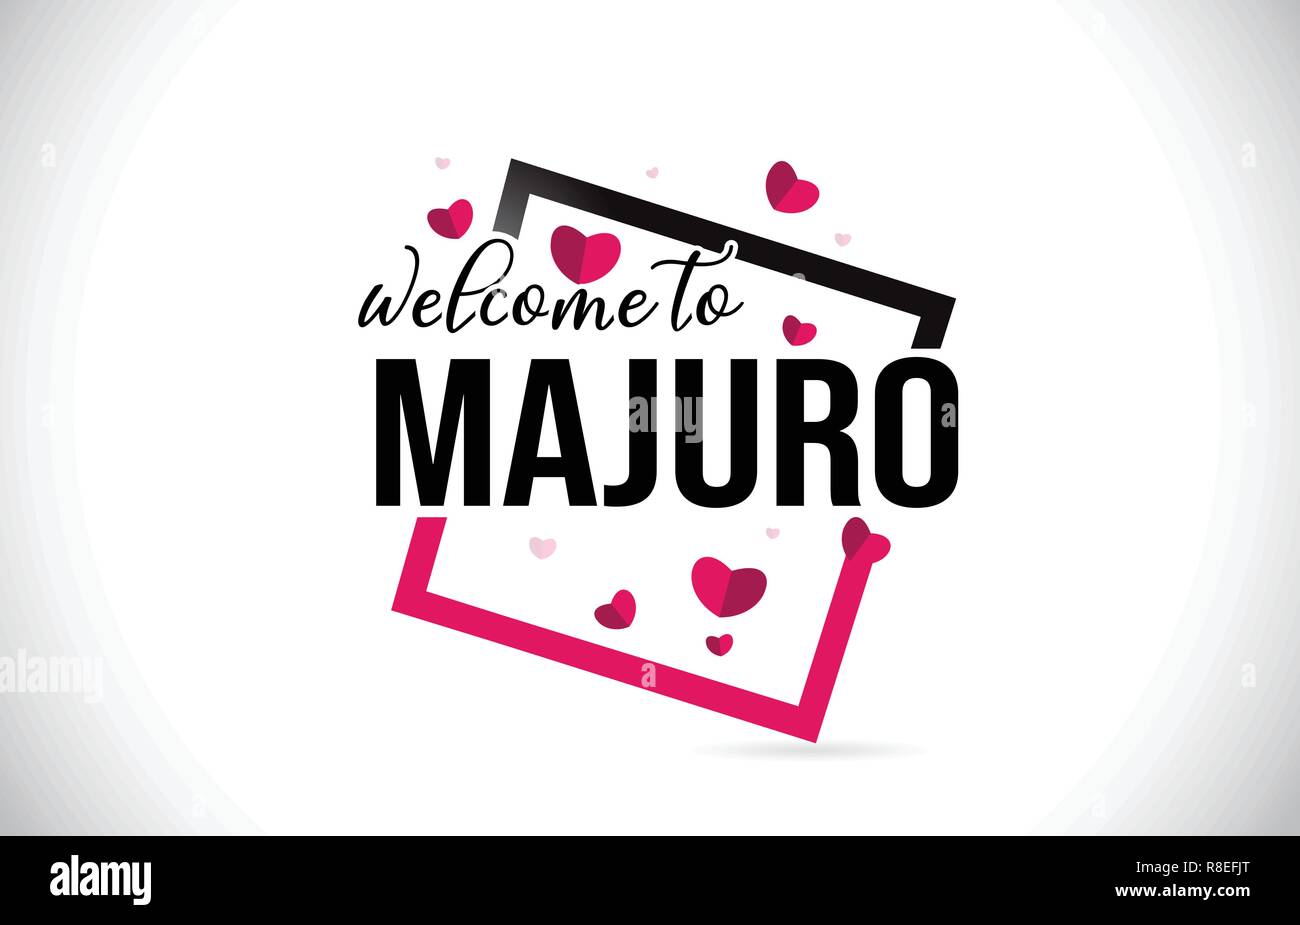 Majuro Welcome To Word Text with Handwritten Font and  Red Hearts Square Design Illustration Vector. Stock Vector